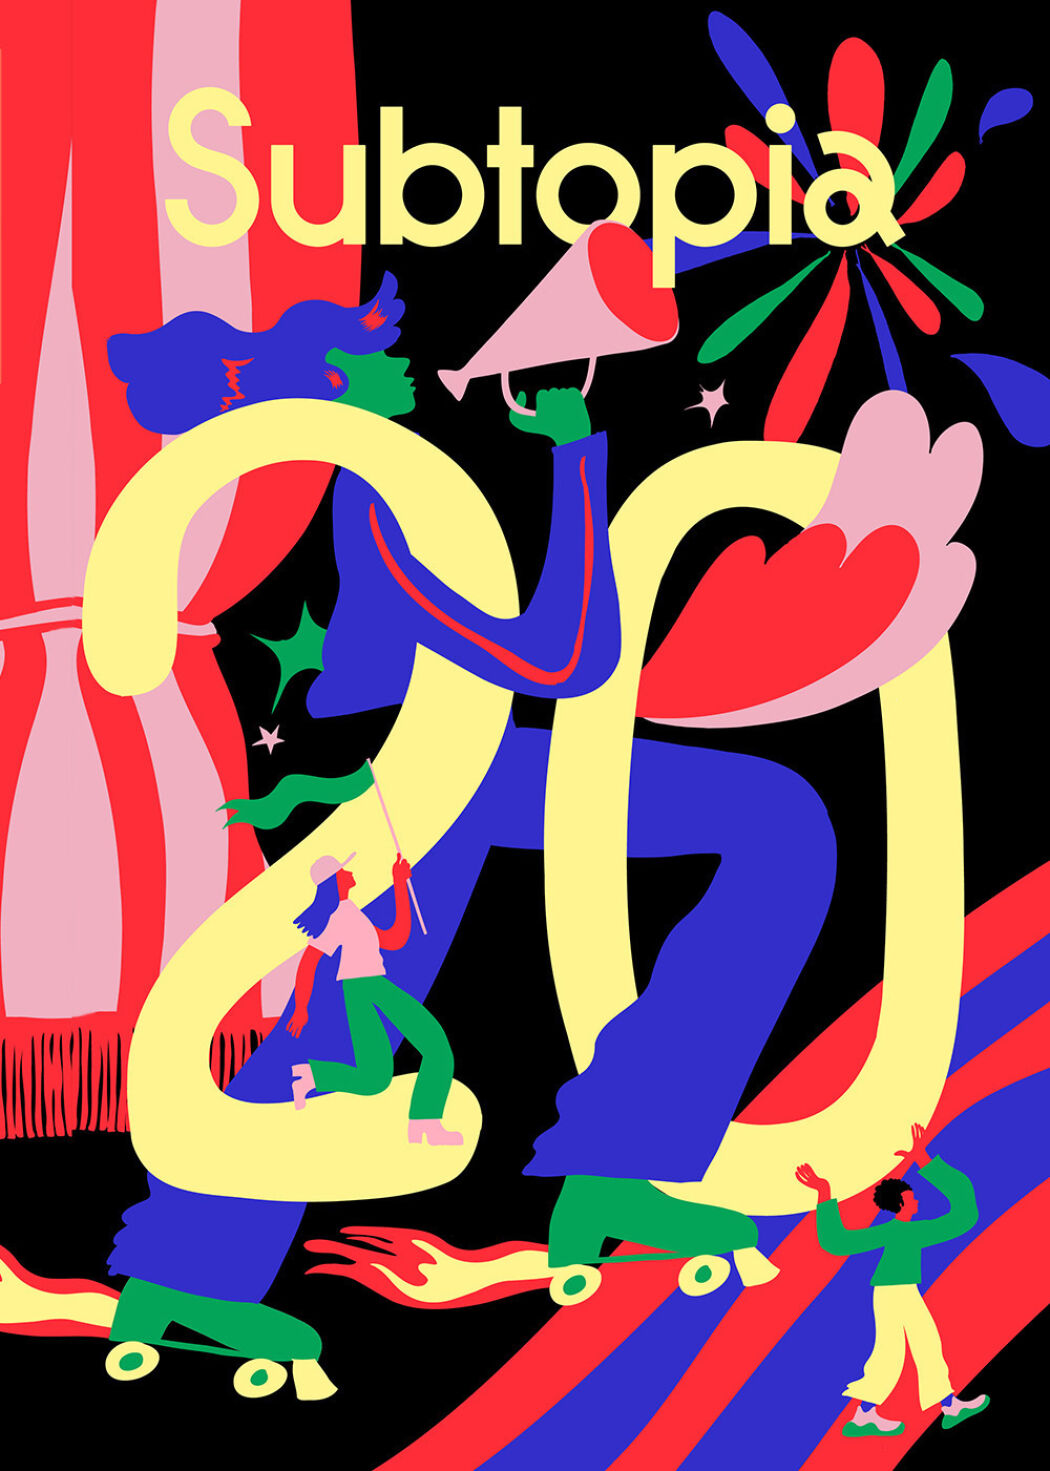 Graphic and colorful poster art work design and art director by Erica Jacobson